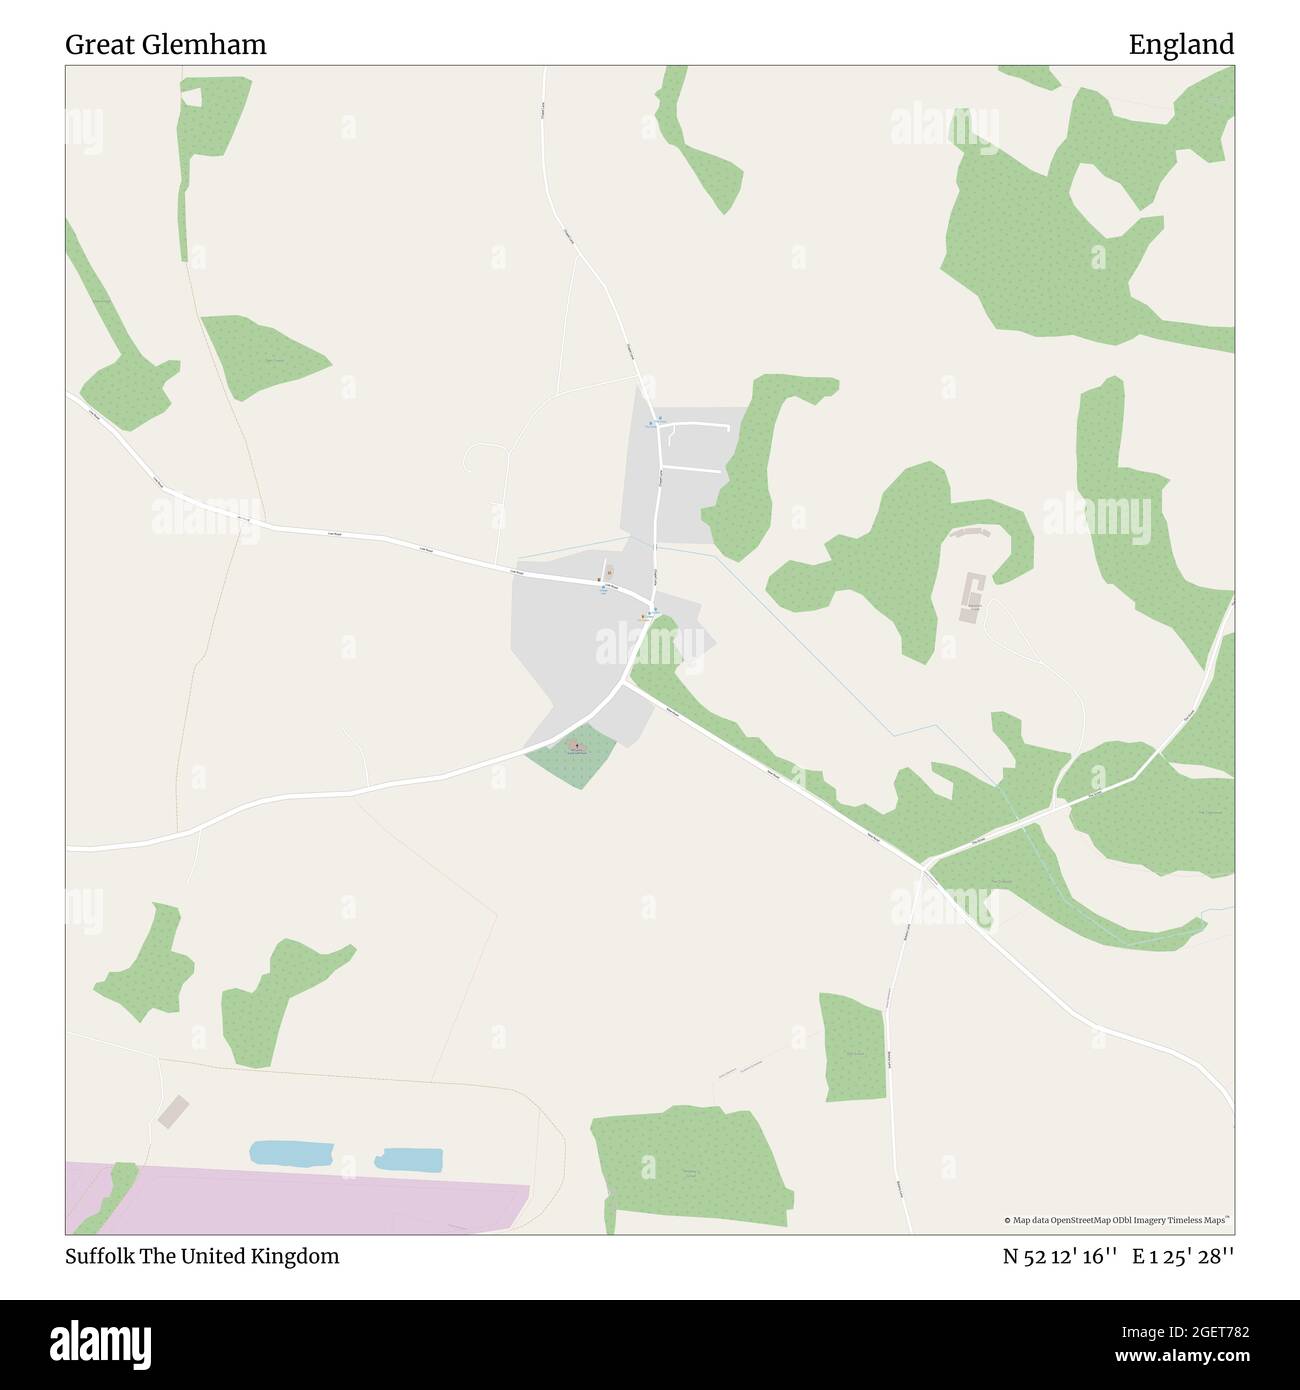 Great Glemham, Suffolk, United Kingdom, England, N 52 12' 16'', E 1 25' 28'', map, Timeless Map published in 2021. Travelers, explorers and adventurers like Florence Nightingale, David Livingstone, Ernest Shackleton, Lewis and Clark and Sherlock Holmes relied on maps to plan travels to the world's most remote corners, Timeless Maps is mapping most locations on the globe, showing the achievement of great dreams Stock Photo